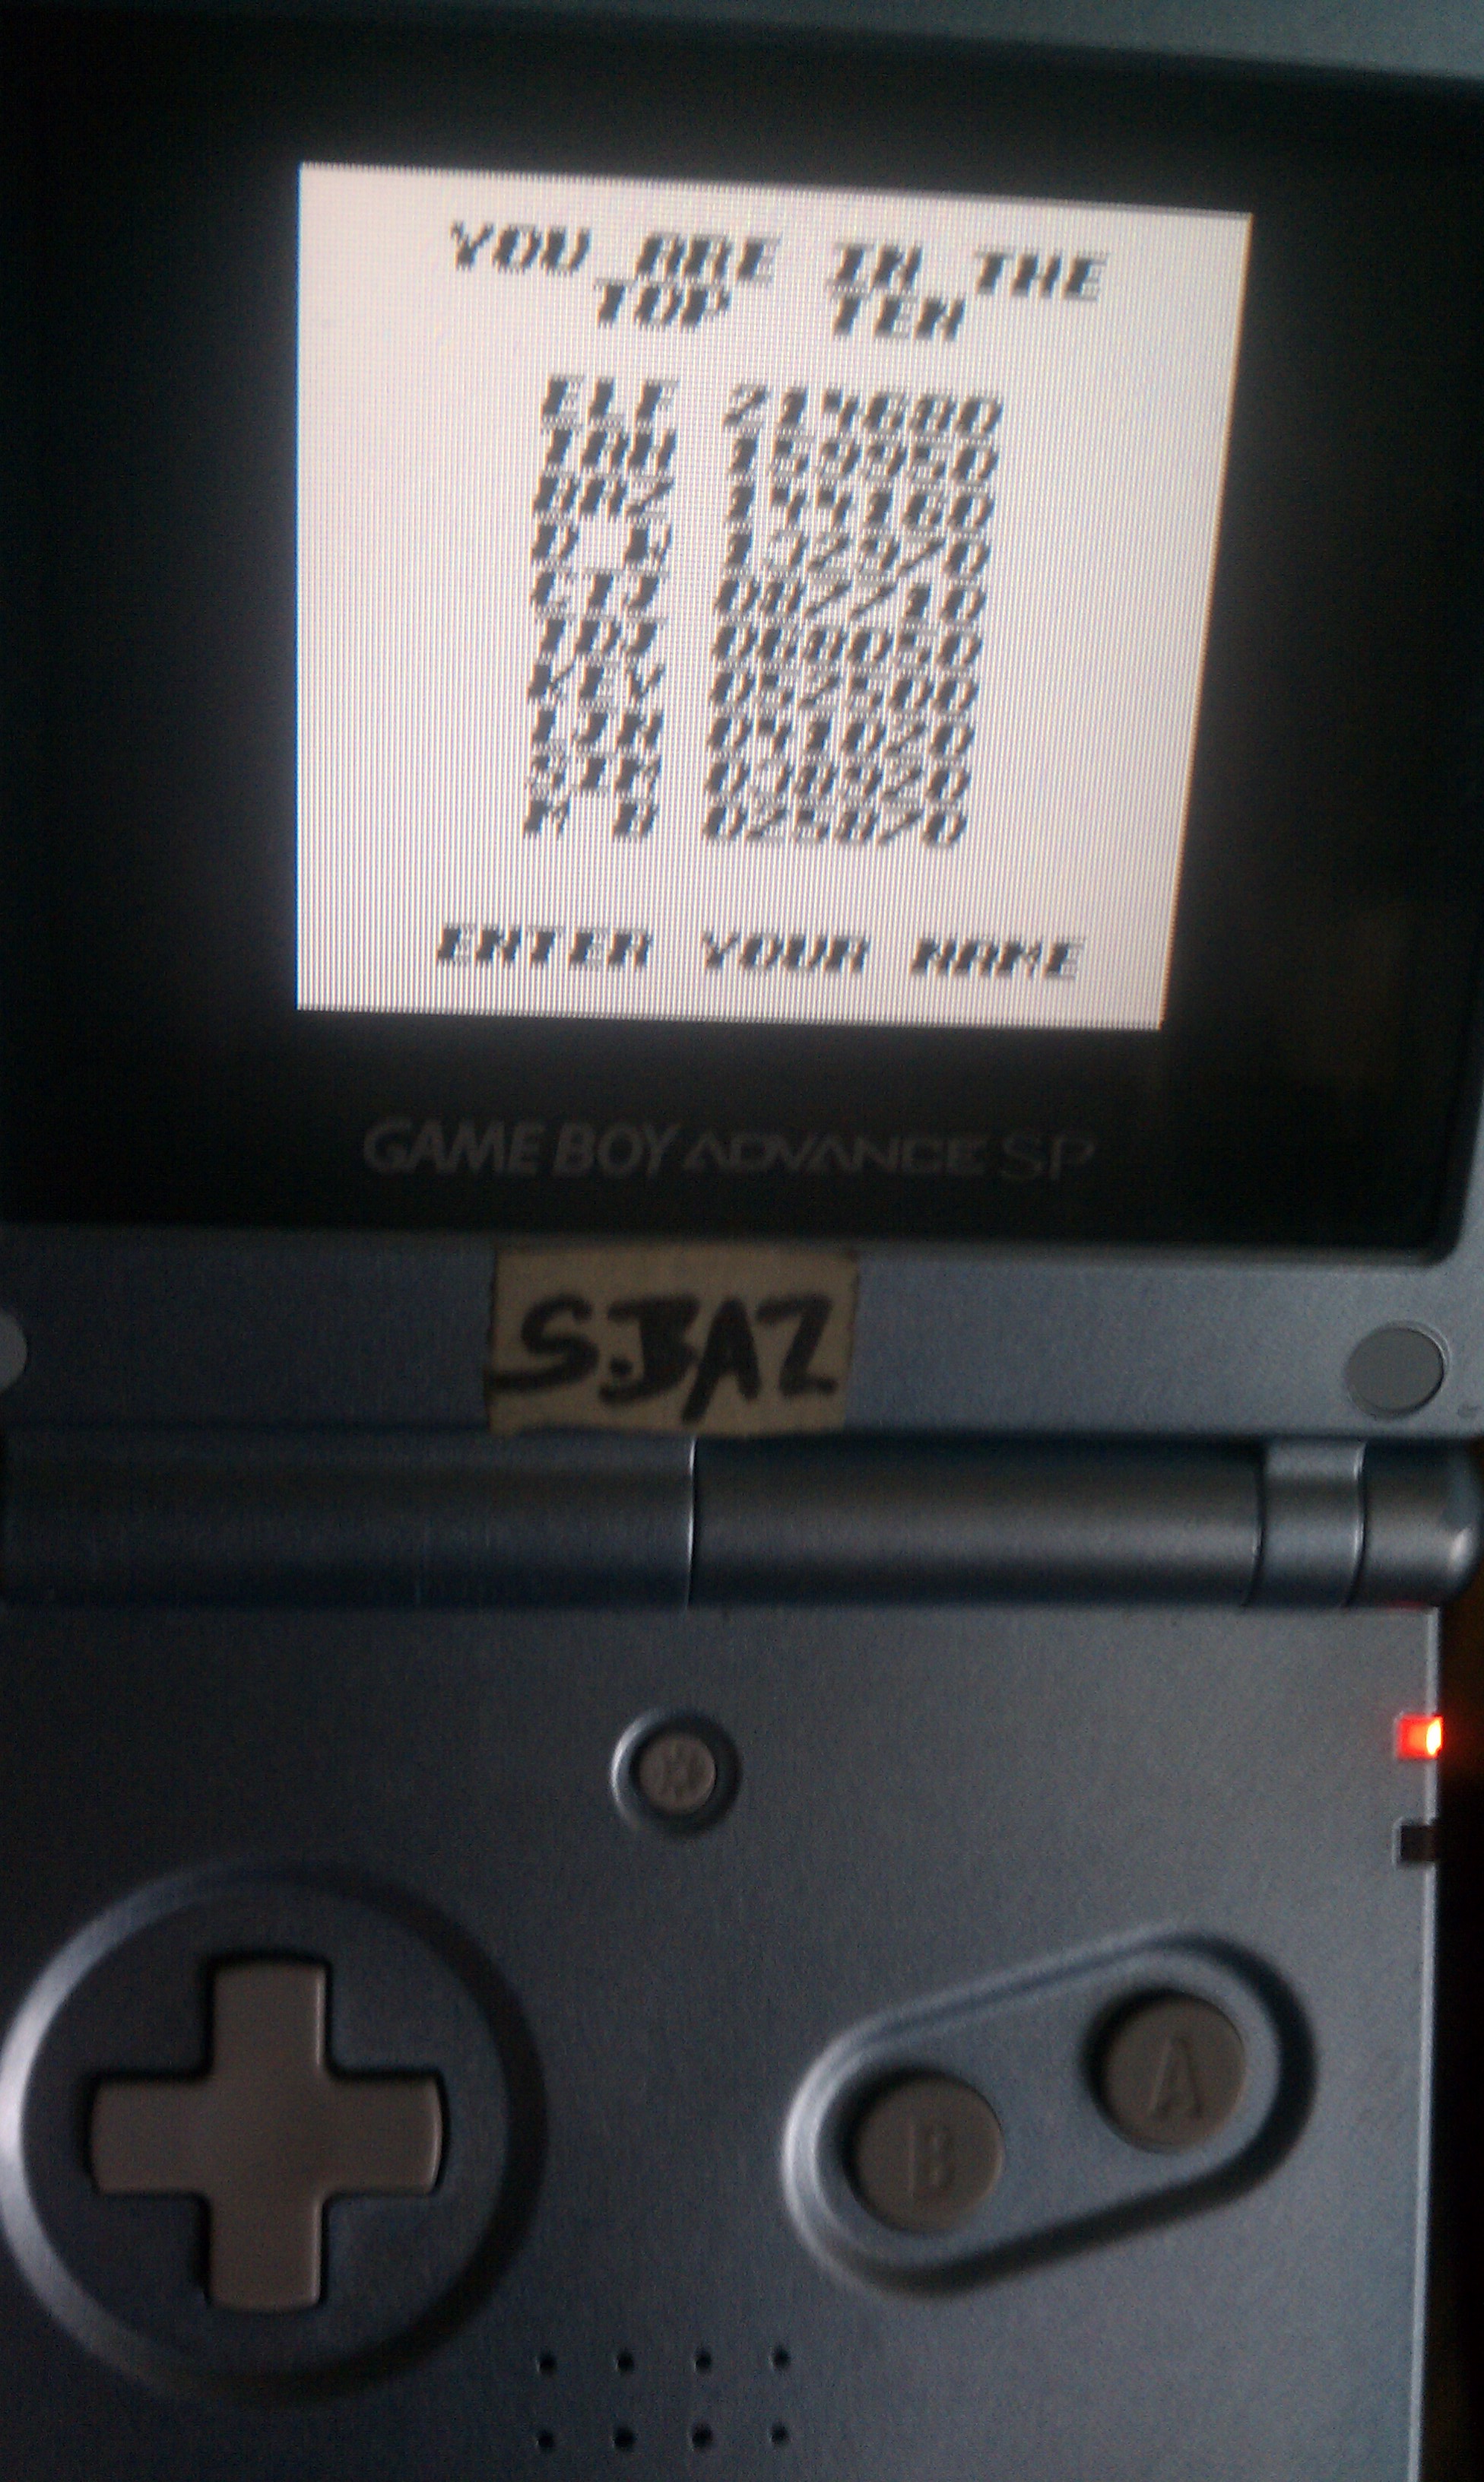 S.BAZ: The Amazing Spider-Man (Game Boy) 144,160 points on 2018-08-24 17:02:37